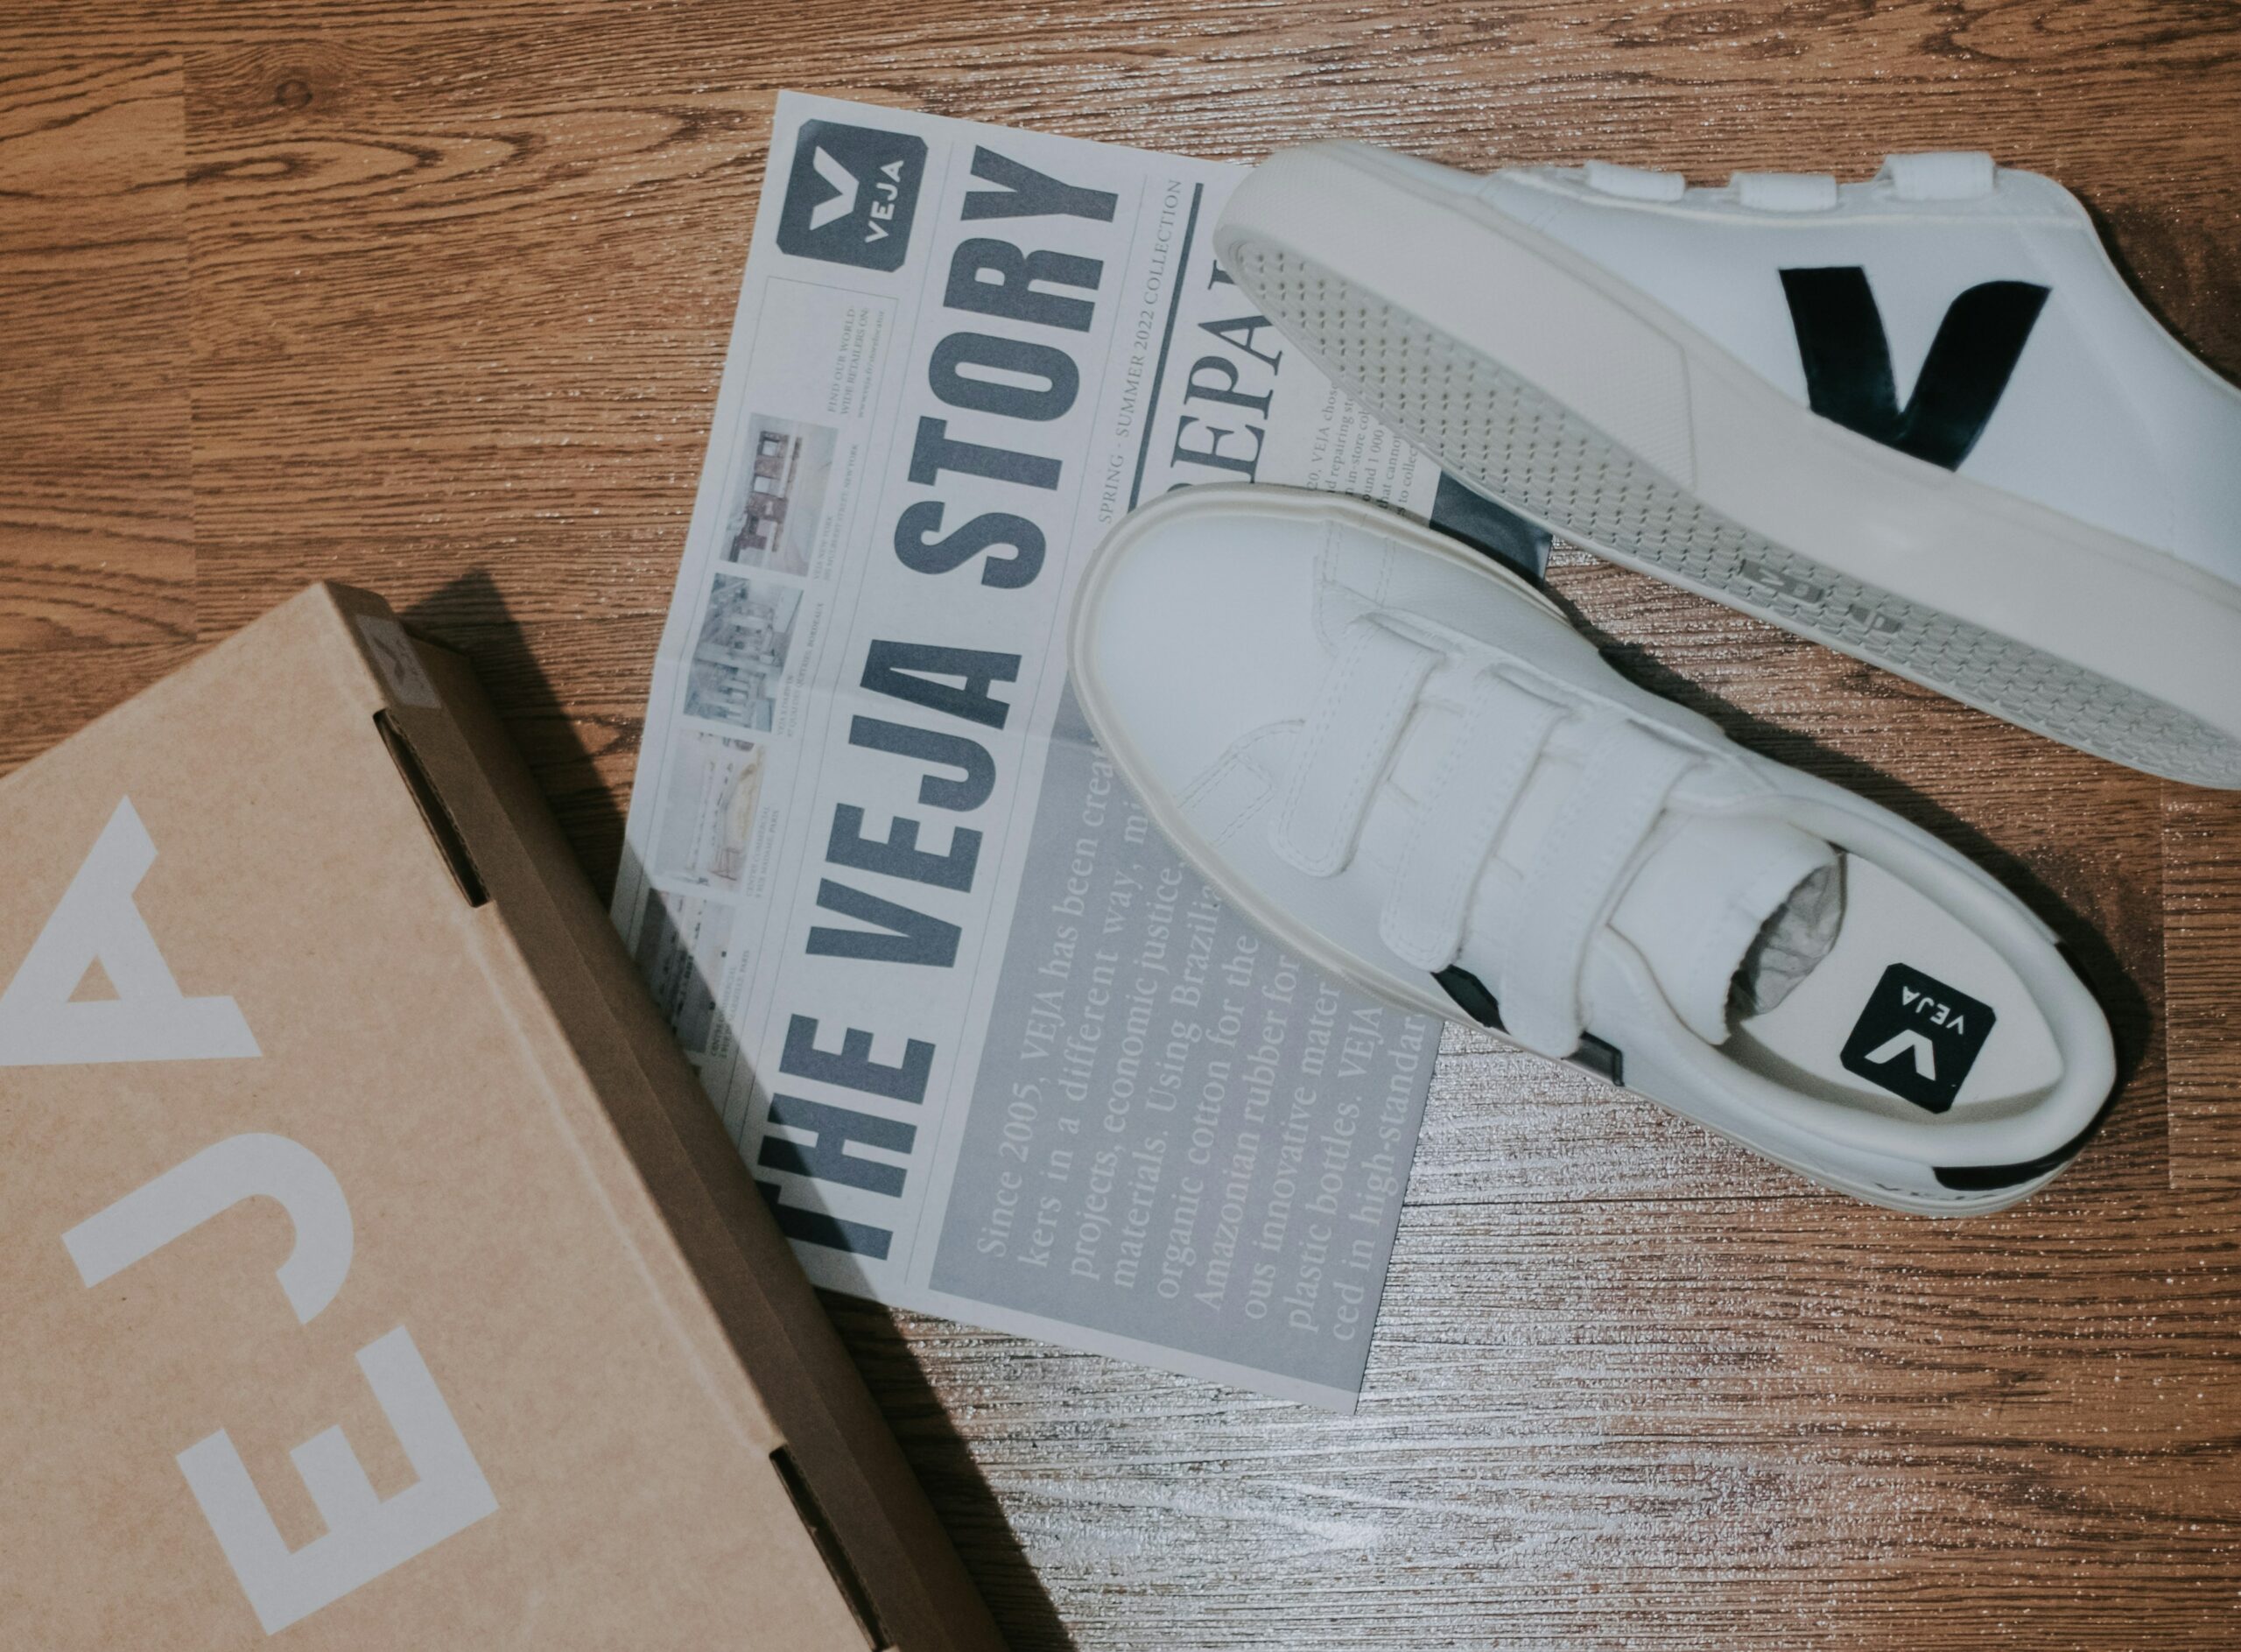 Veja Shoes stlized with the product box and a newspaper pamphlet describing the story of Veja